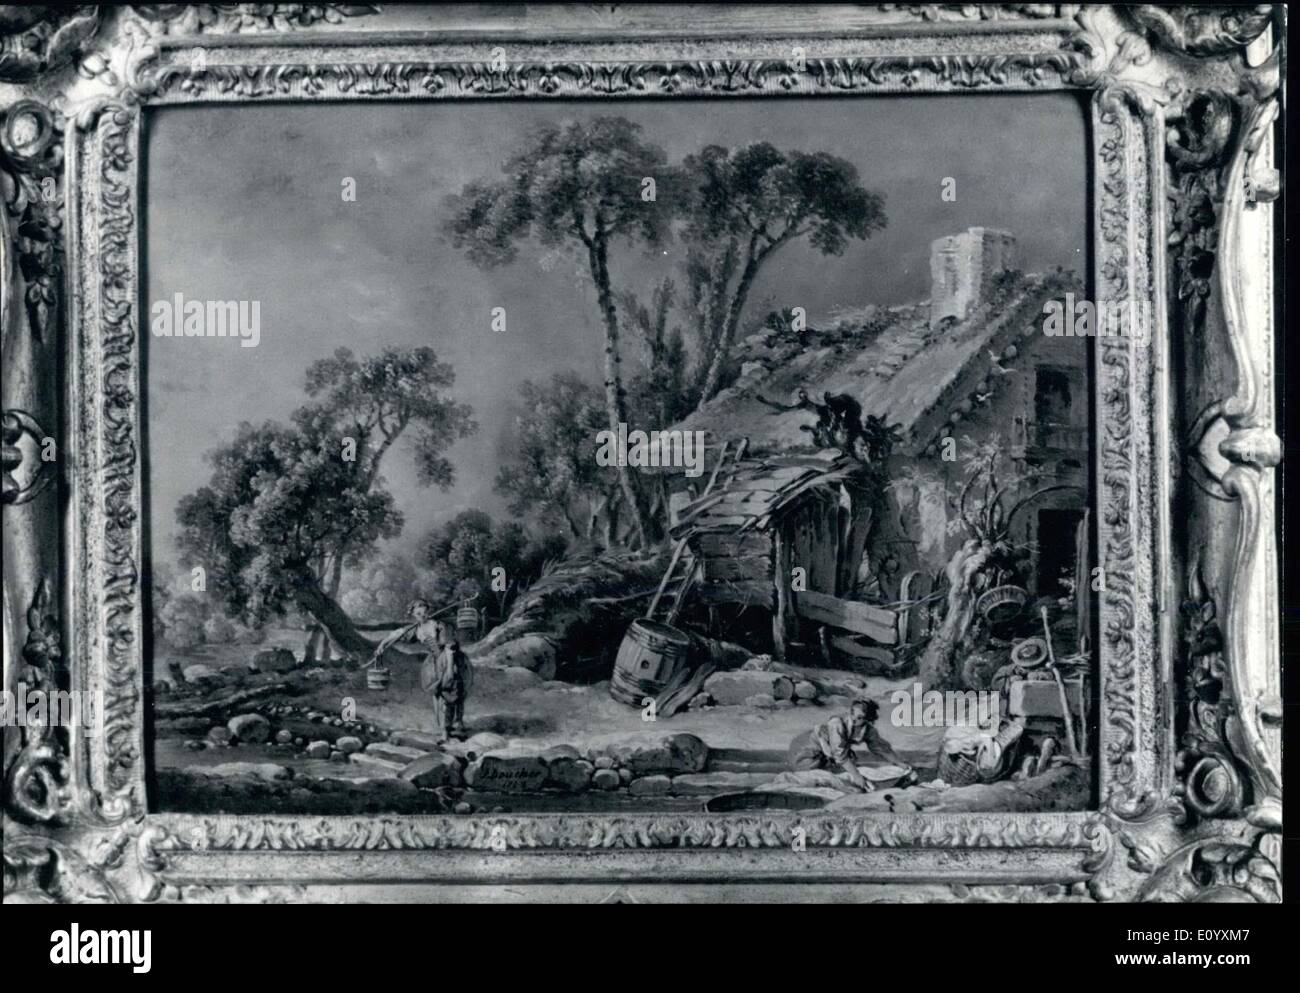 Oct. 10, 1971 - Only for sale together: are those two paintings of the French rococo painter Francois Bouchet. ''Paysage ave un Stock Photo